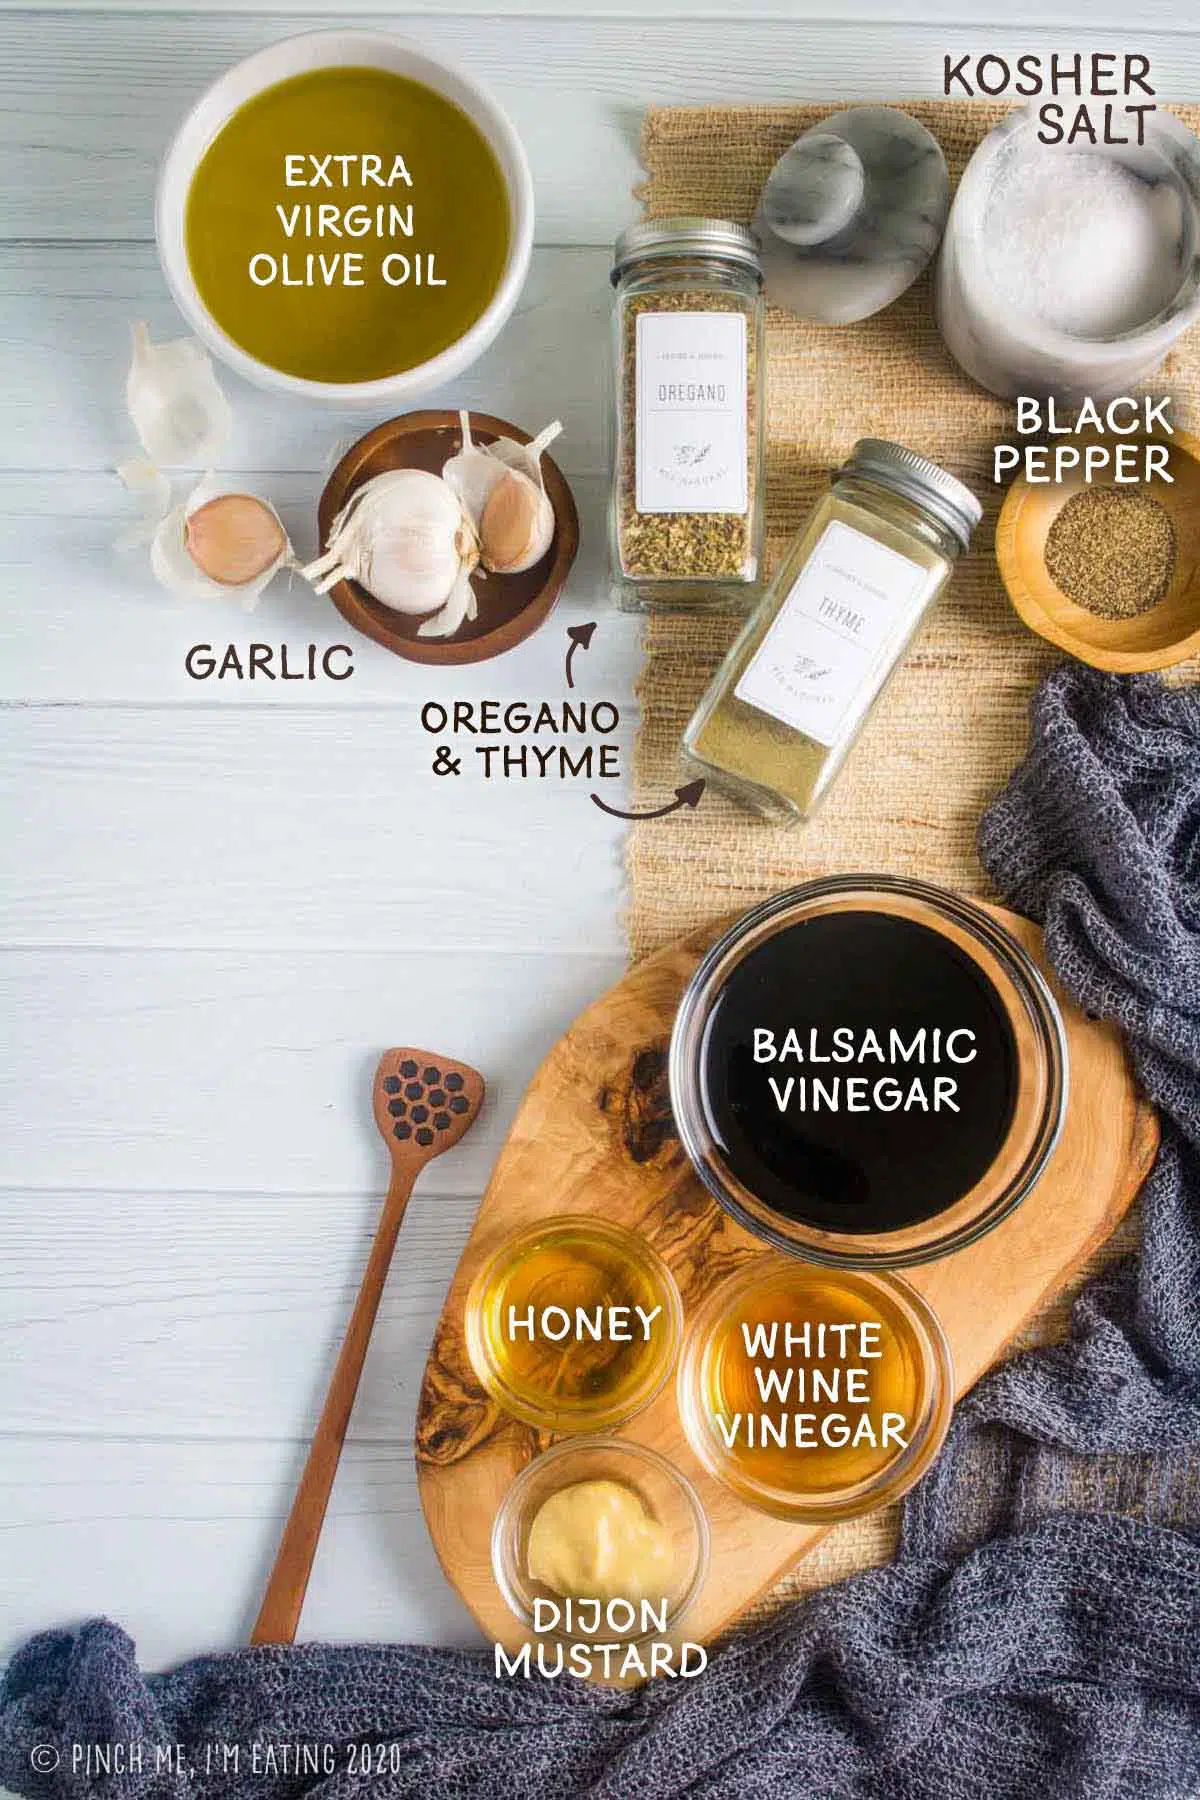 Ingredients for homemade creamy balsamic dressing with honey, dijon mustard, garlic, and olive oil.